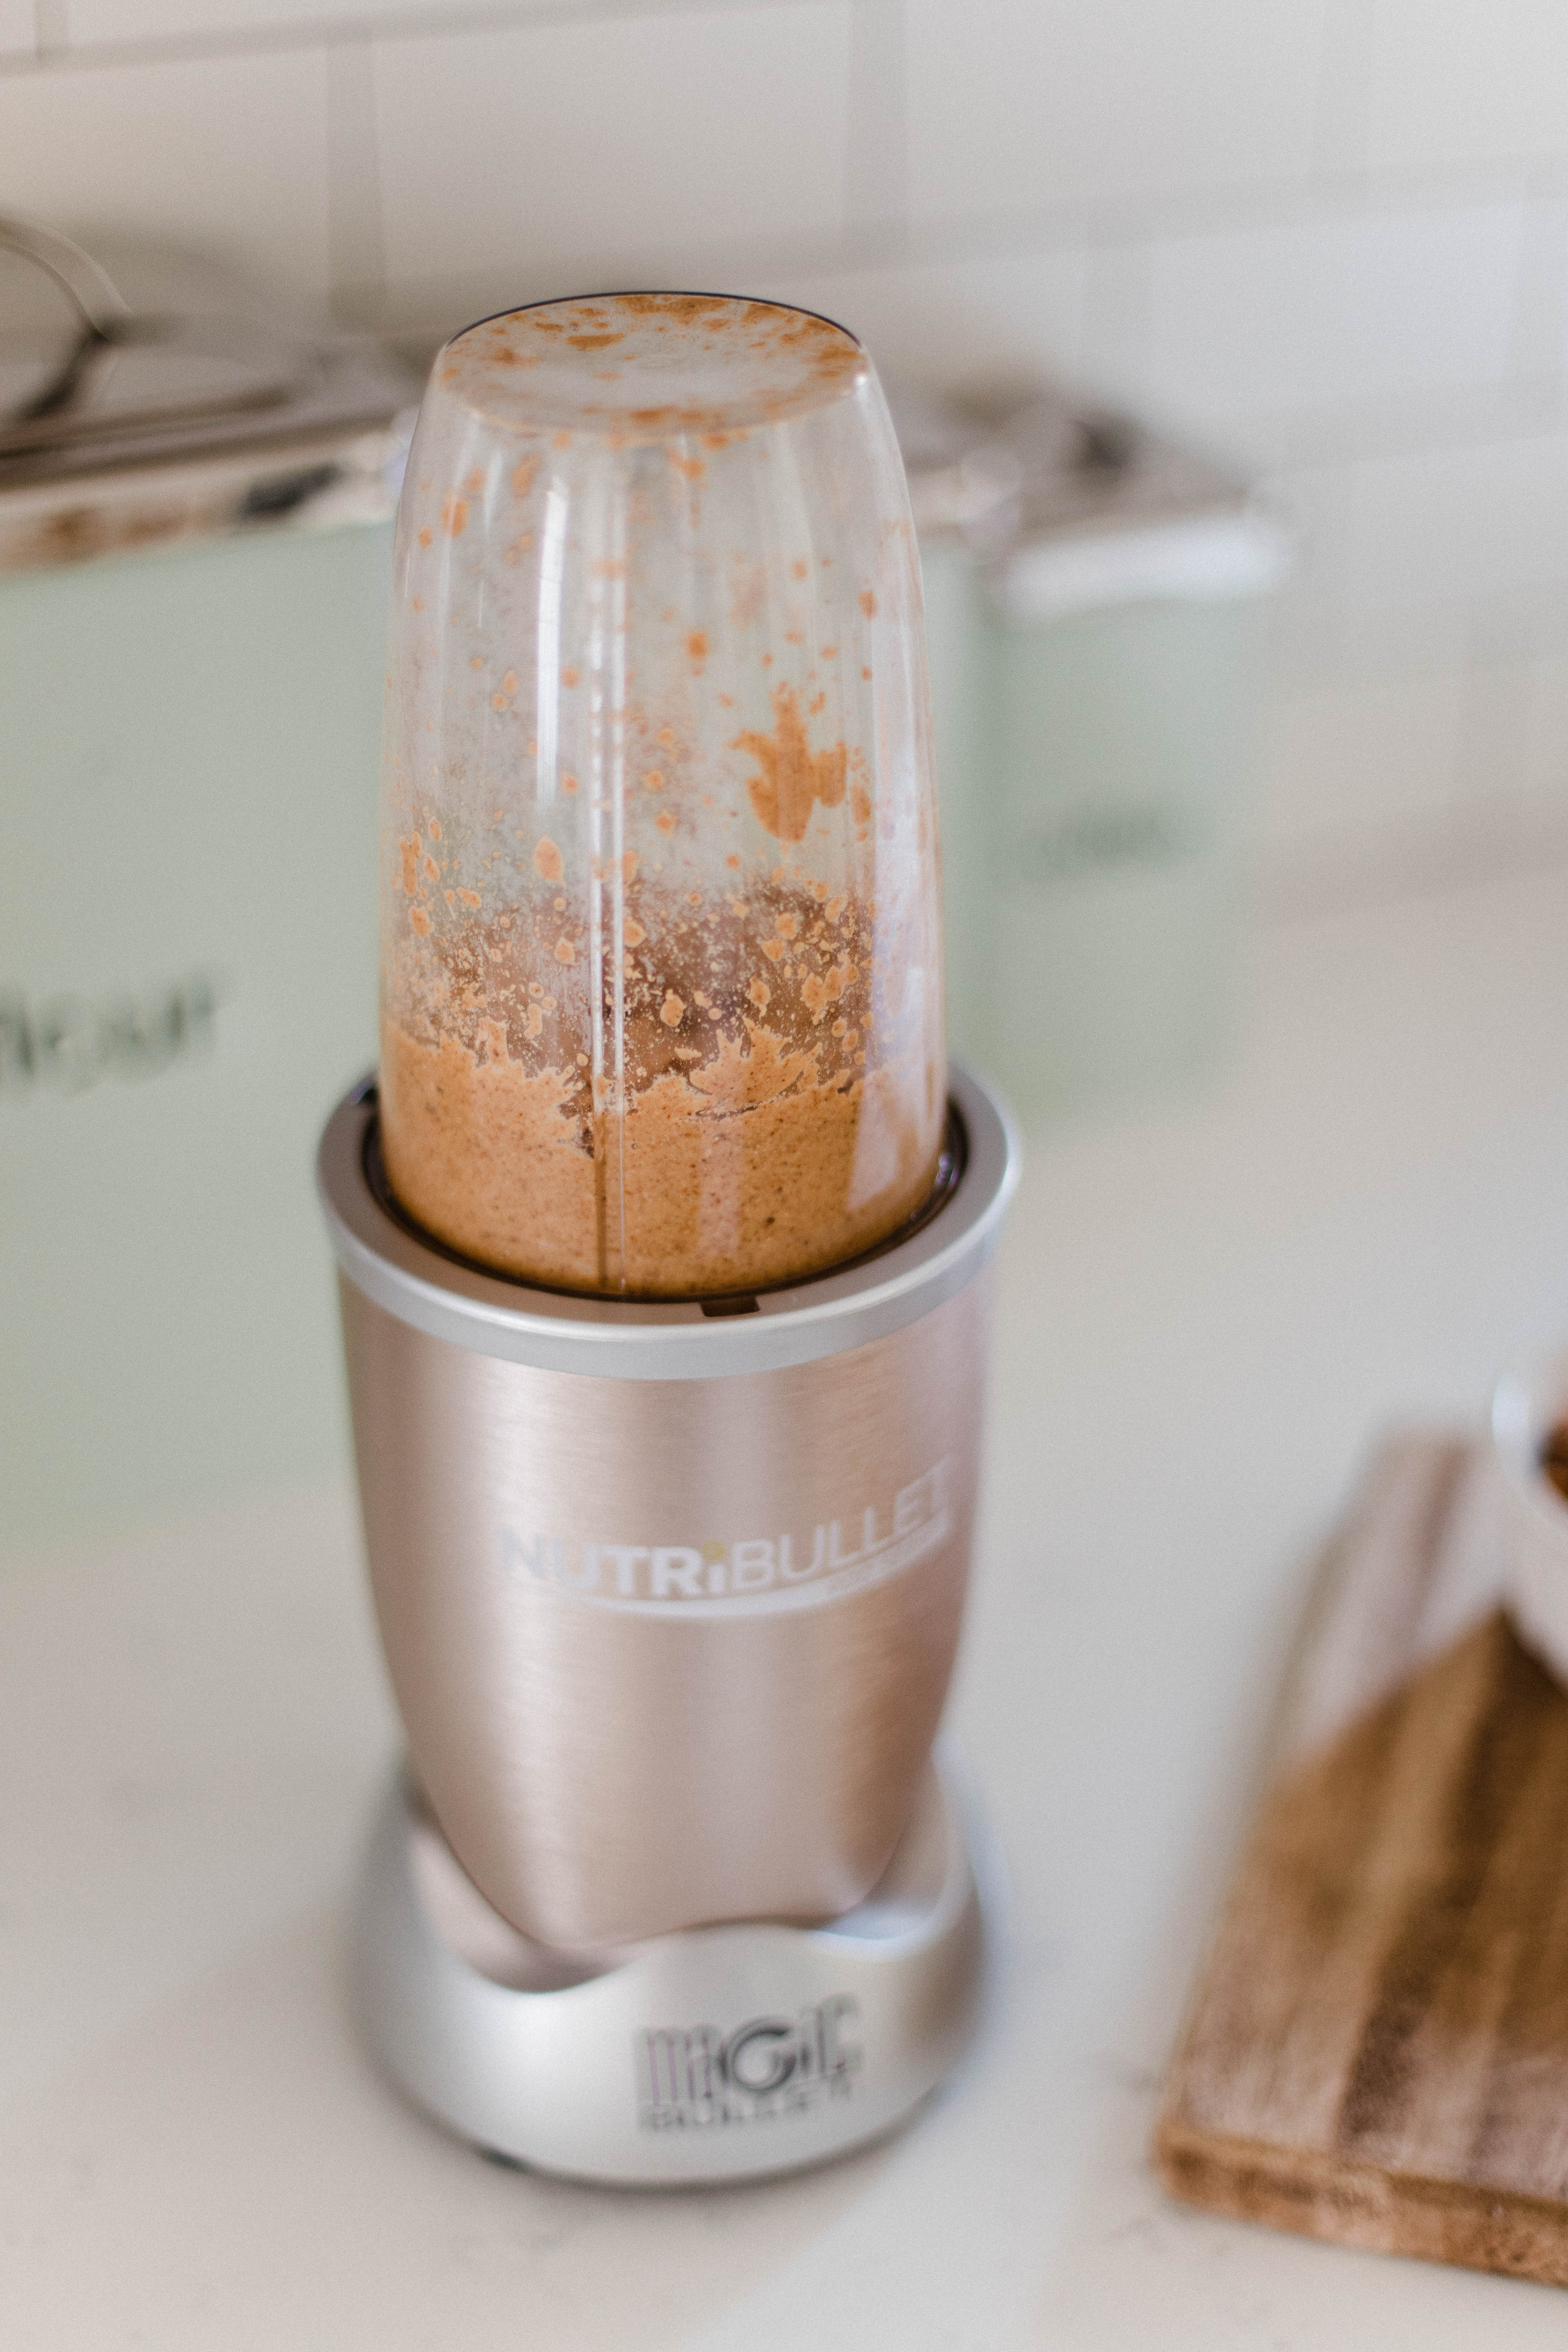 Connecticut life and style blogger Lauren McBride shares an Easy Homemade Almond Butter recipe using almonds and a NutriBullet.